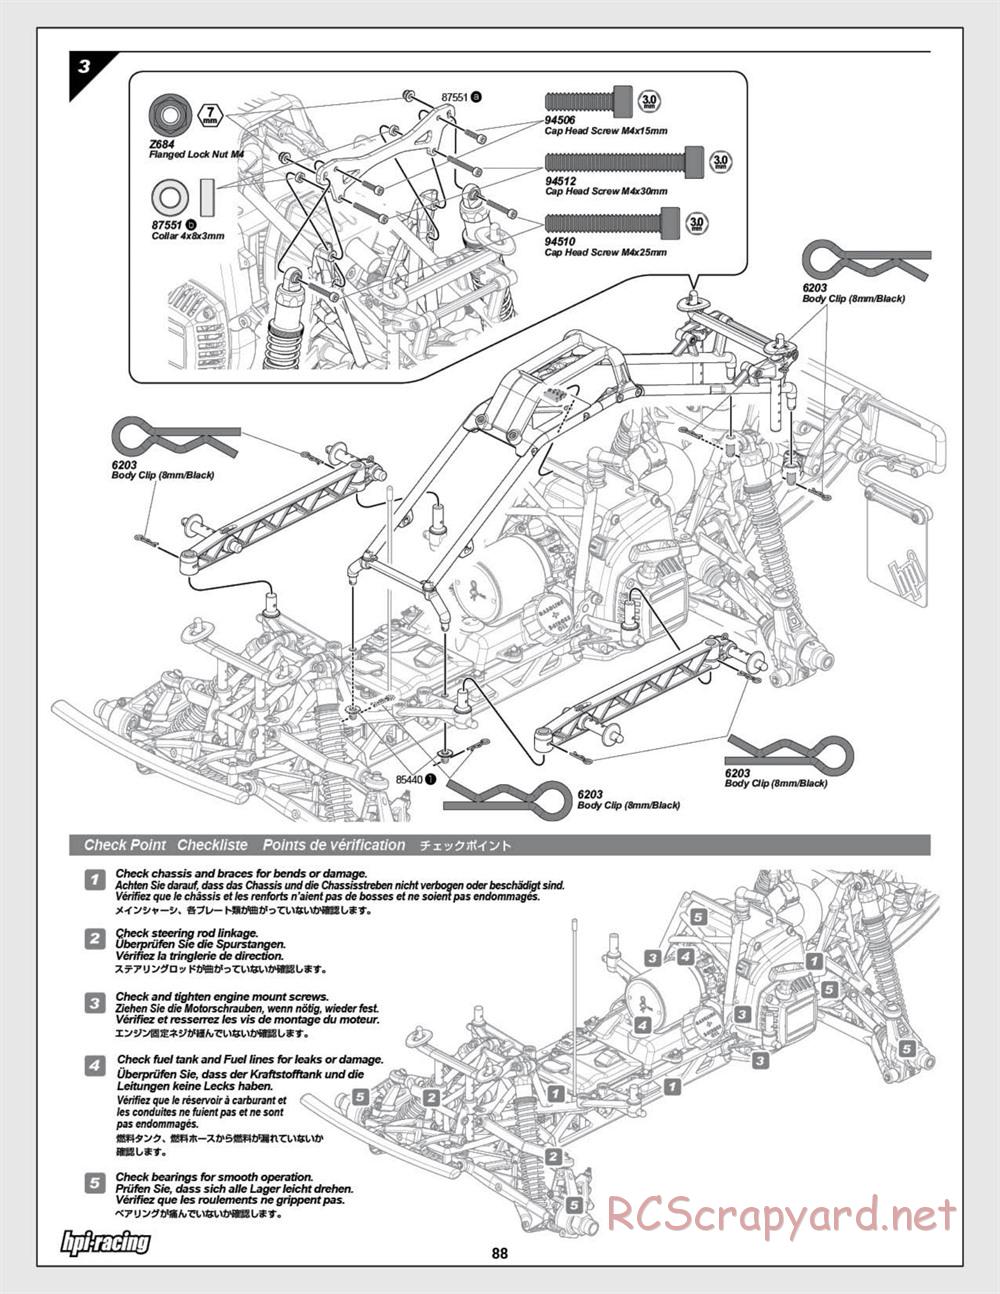 HPI - Baja 5SC SS - Exploded View - Page 88